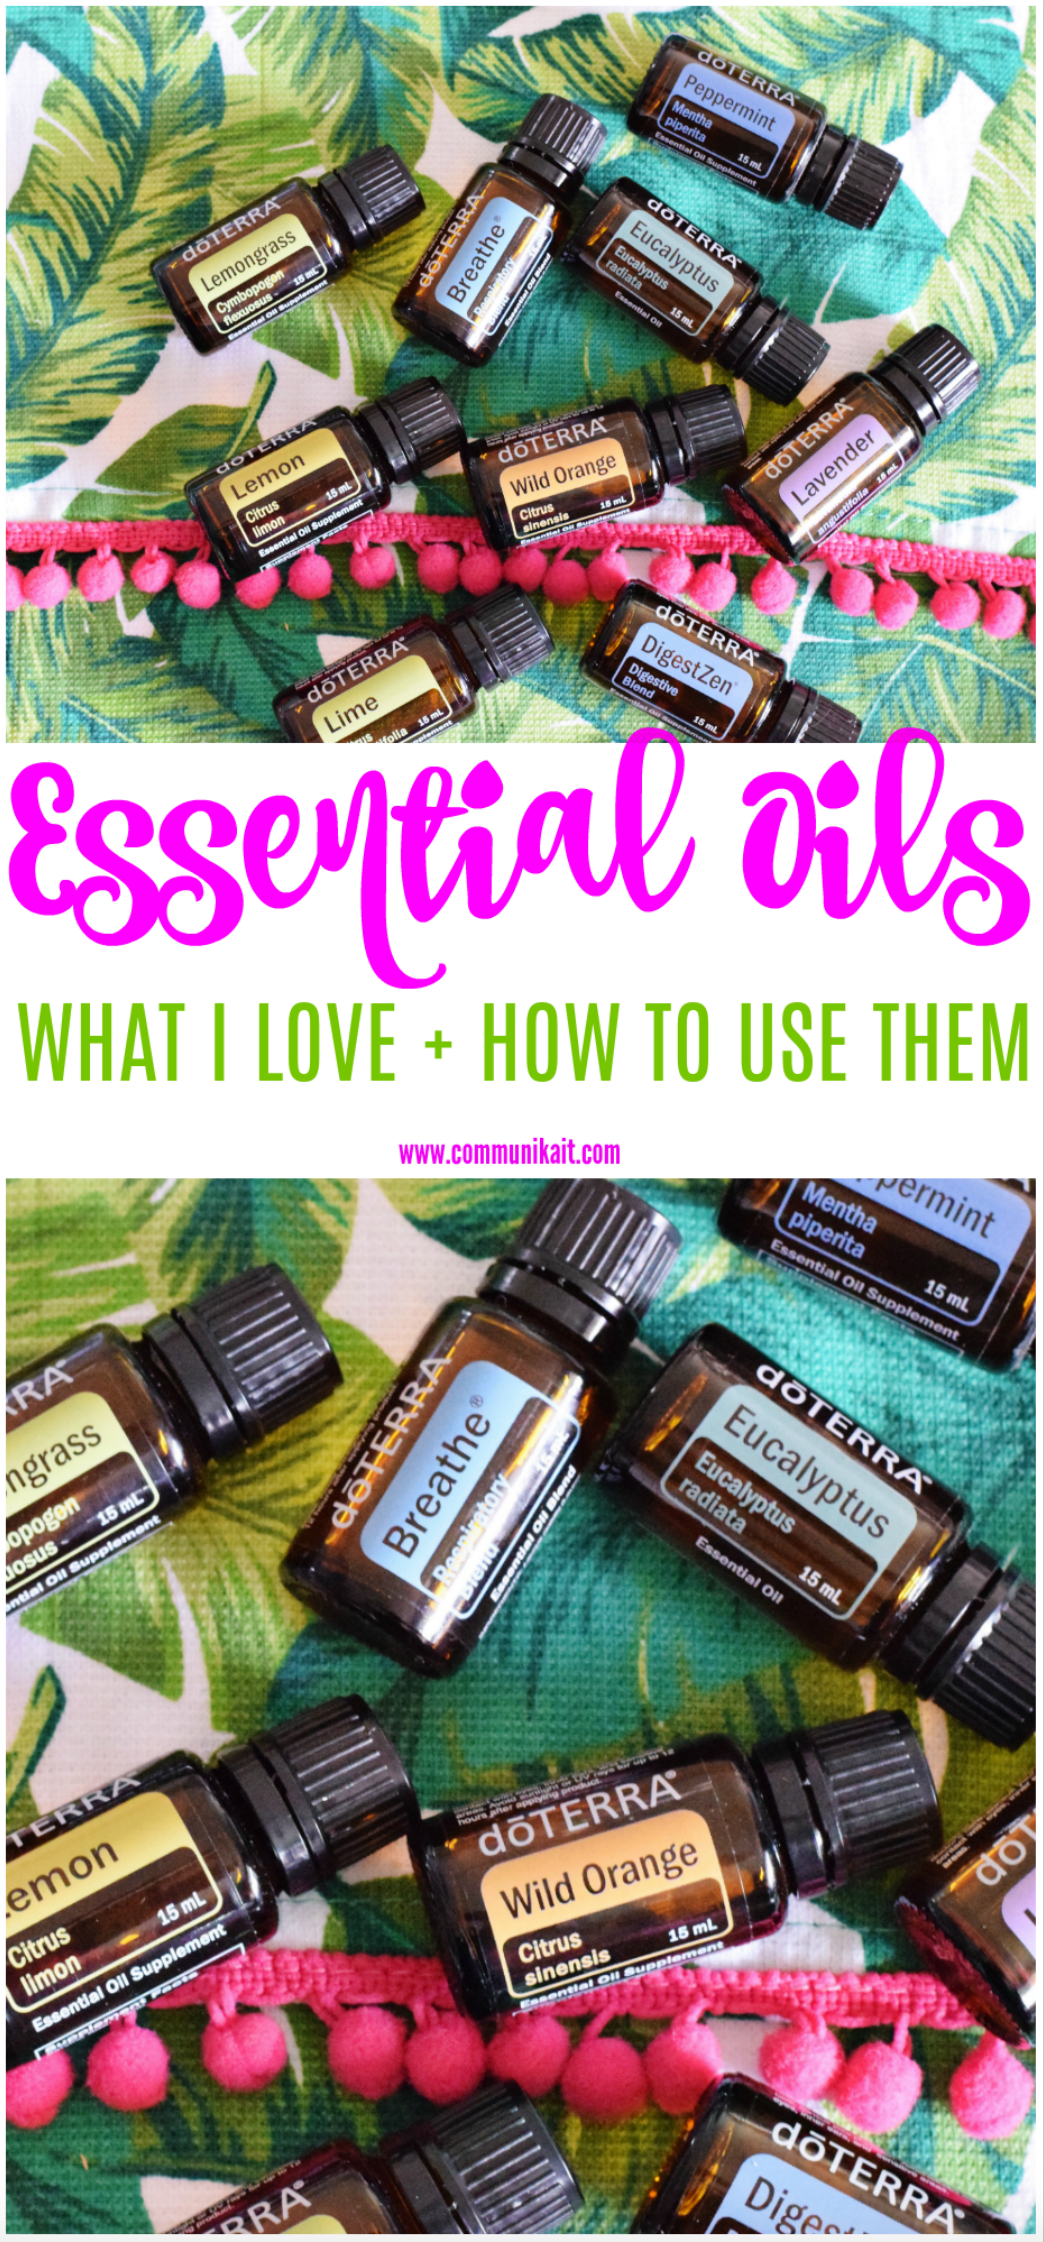 Essential Oils I Love + How I Use Them - recipes, diffusing, wellness and more! - CommuniKait - Essential Oils For Beginnings - Essential Oils DIY - Essential Oils Doterra - Essential Oils Recipes - For Skin - For Allergies - Uses For Essential Oils